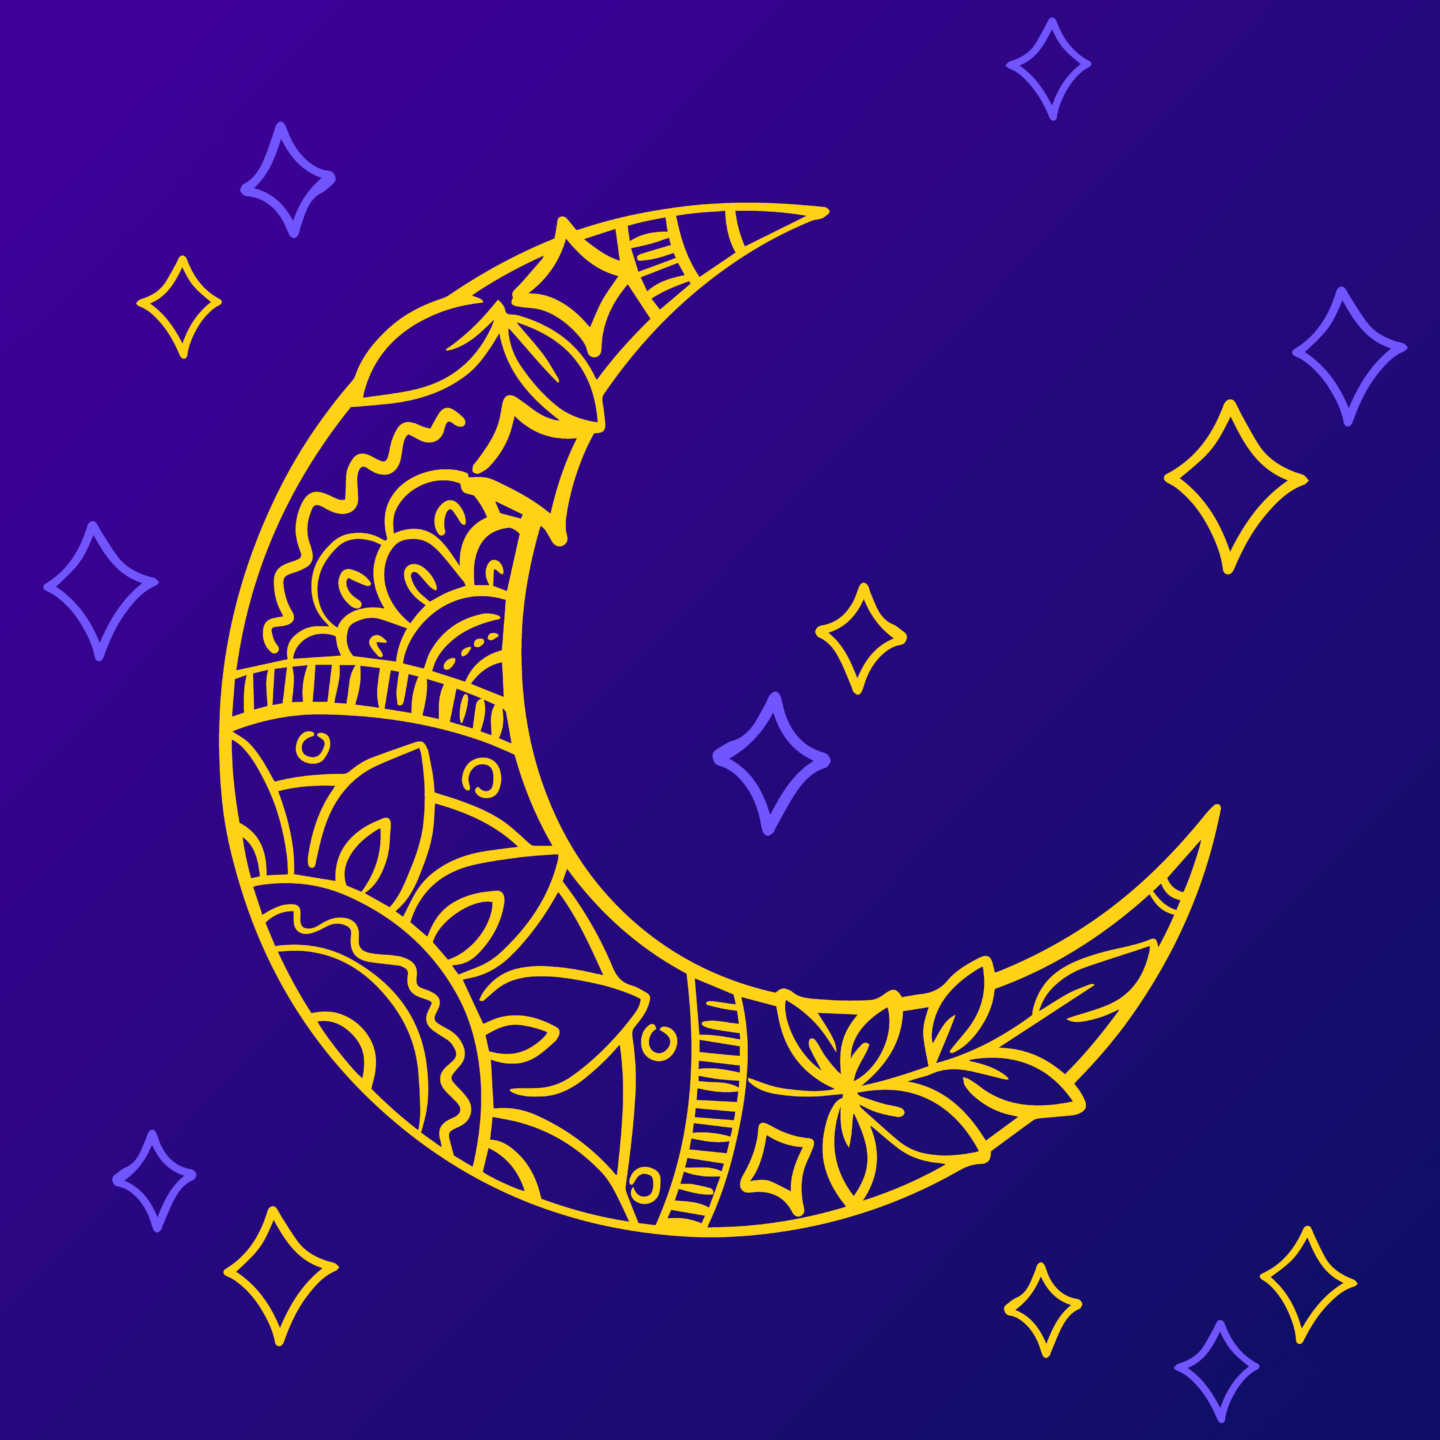 Illustration of a decorated crescent moon